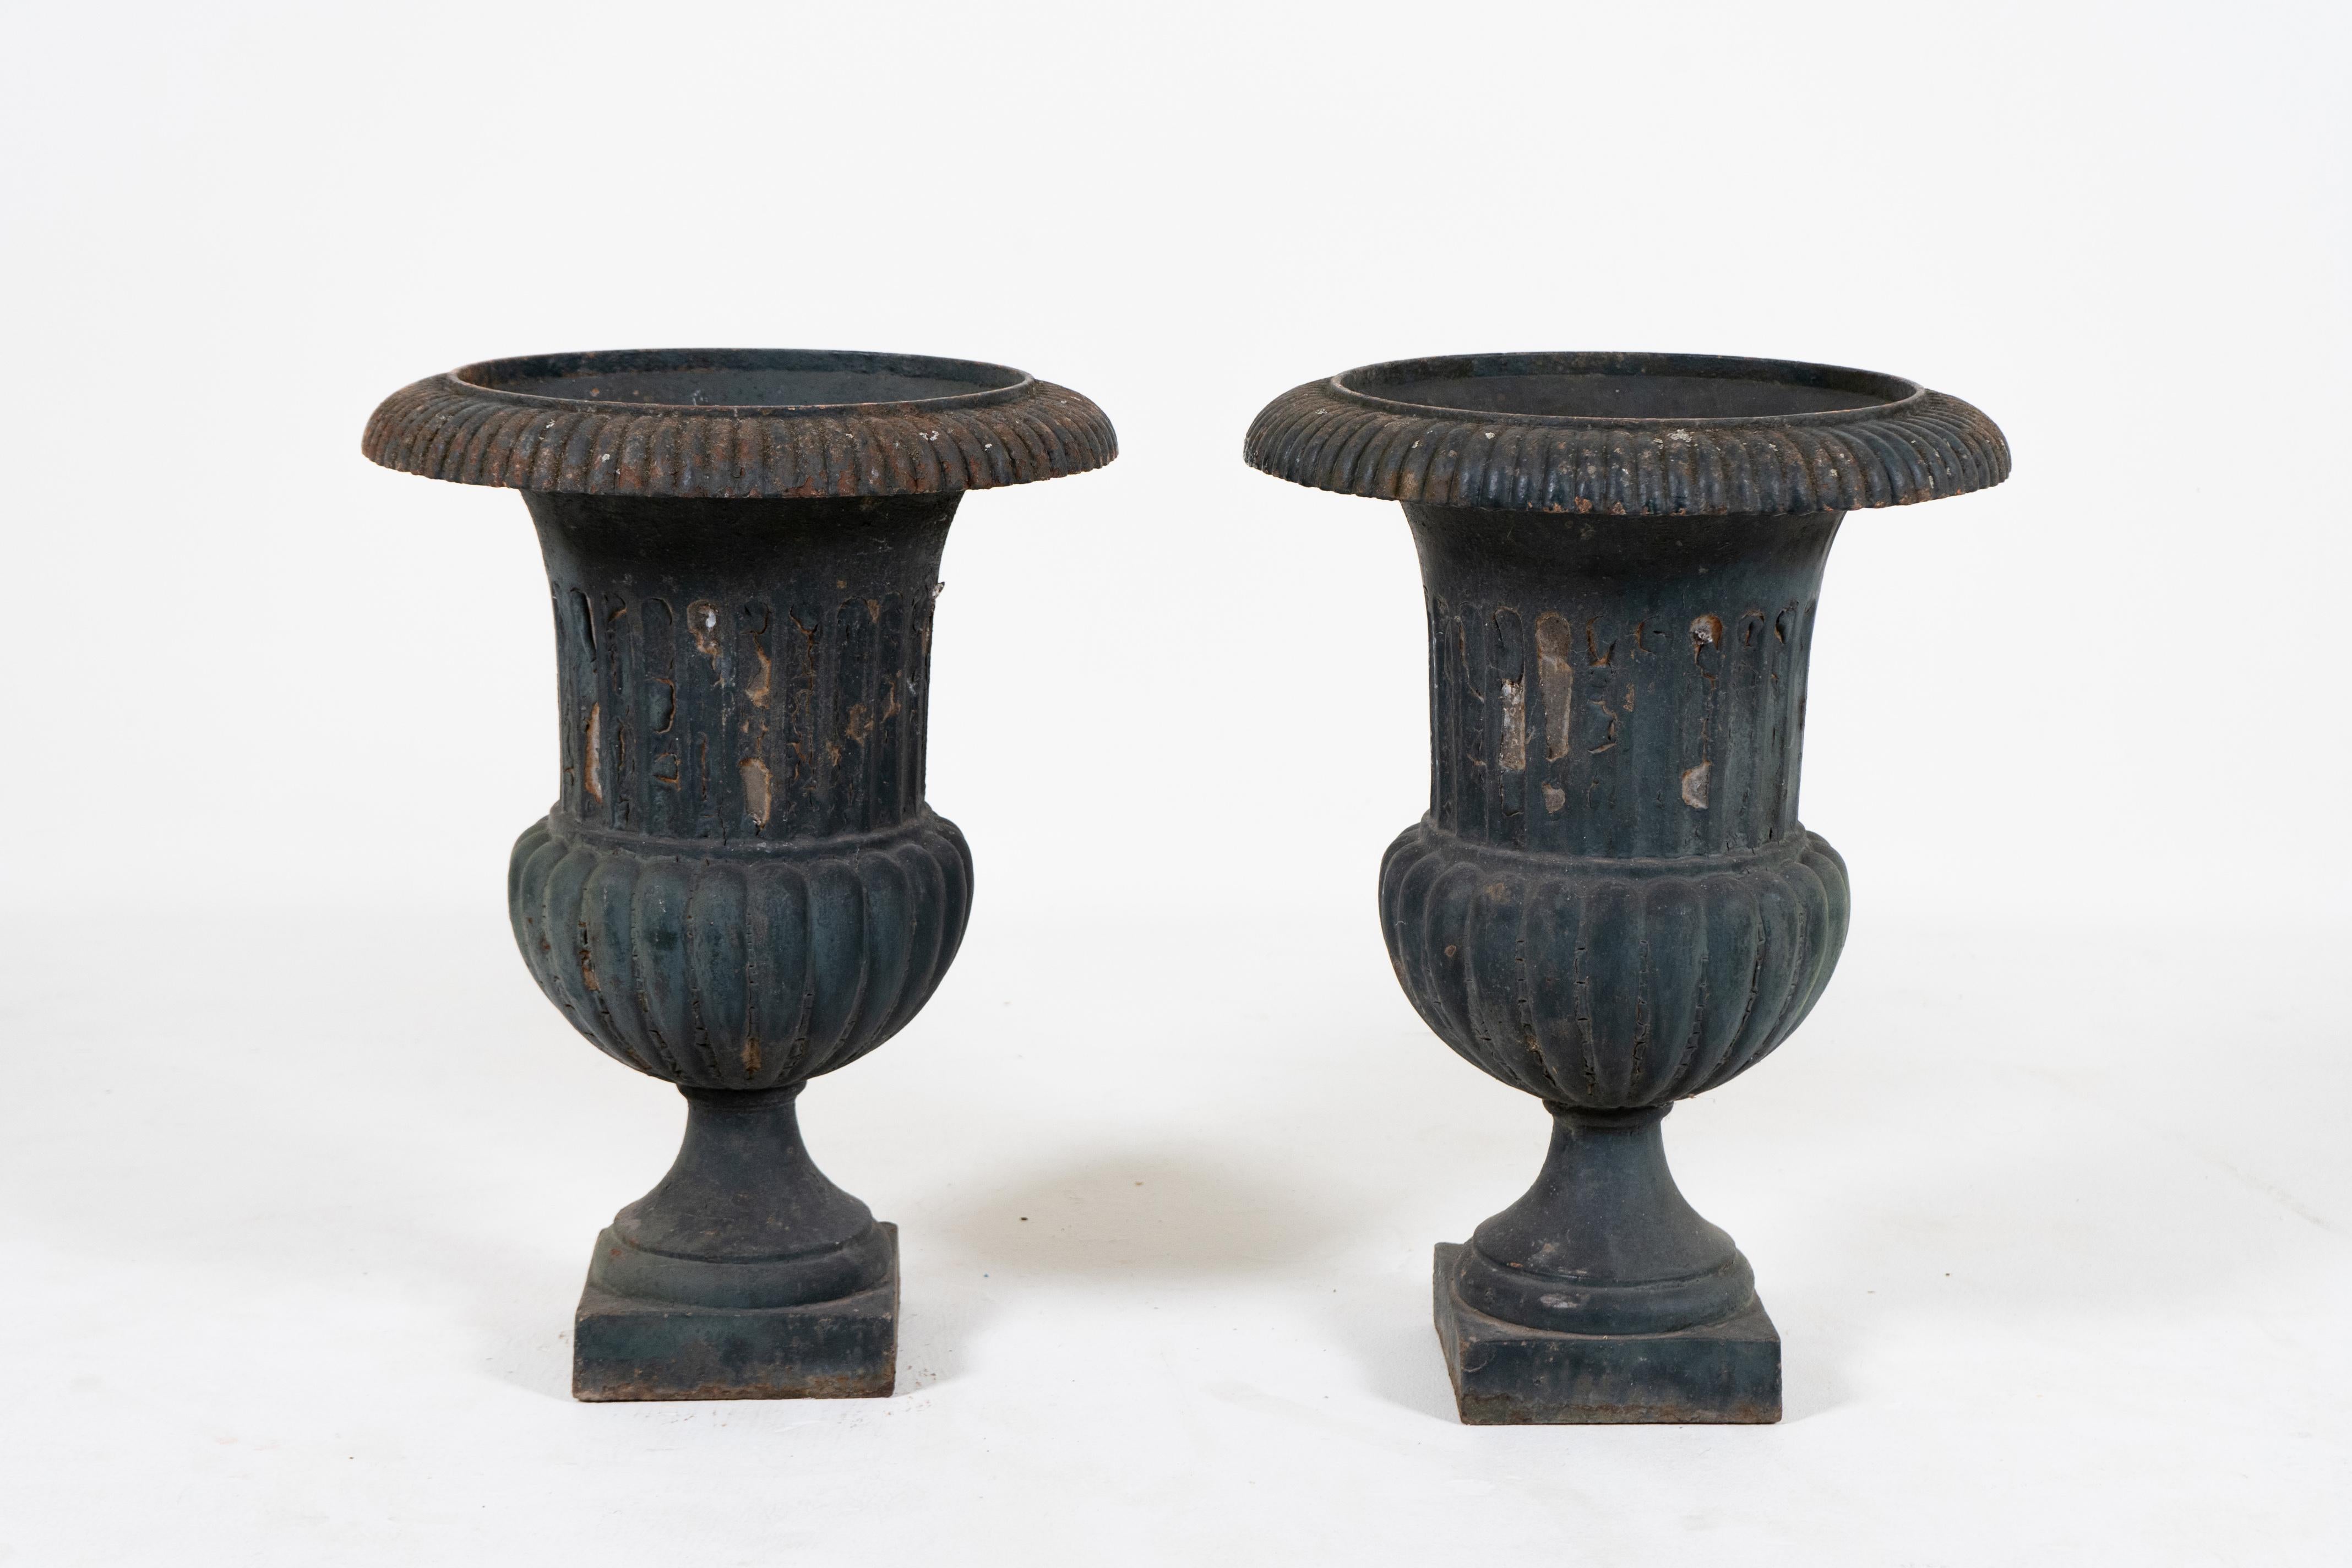 A Pair of Antique French Neoclassical Iron Garden Urns in Black In Good Condition For Sale In Chicago, IL